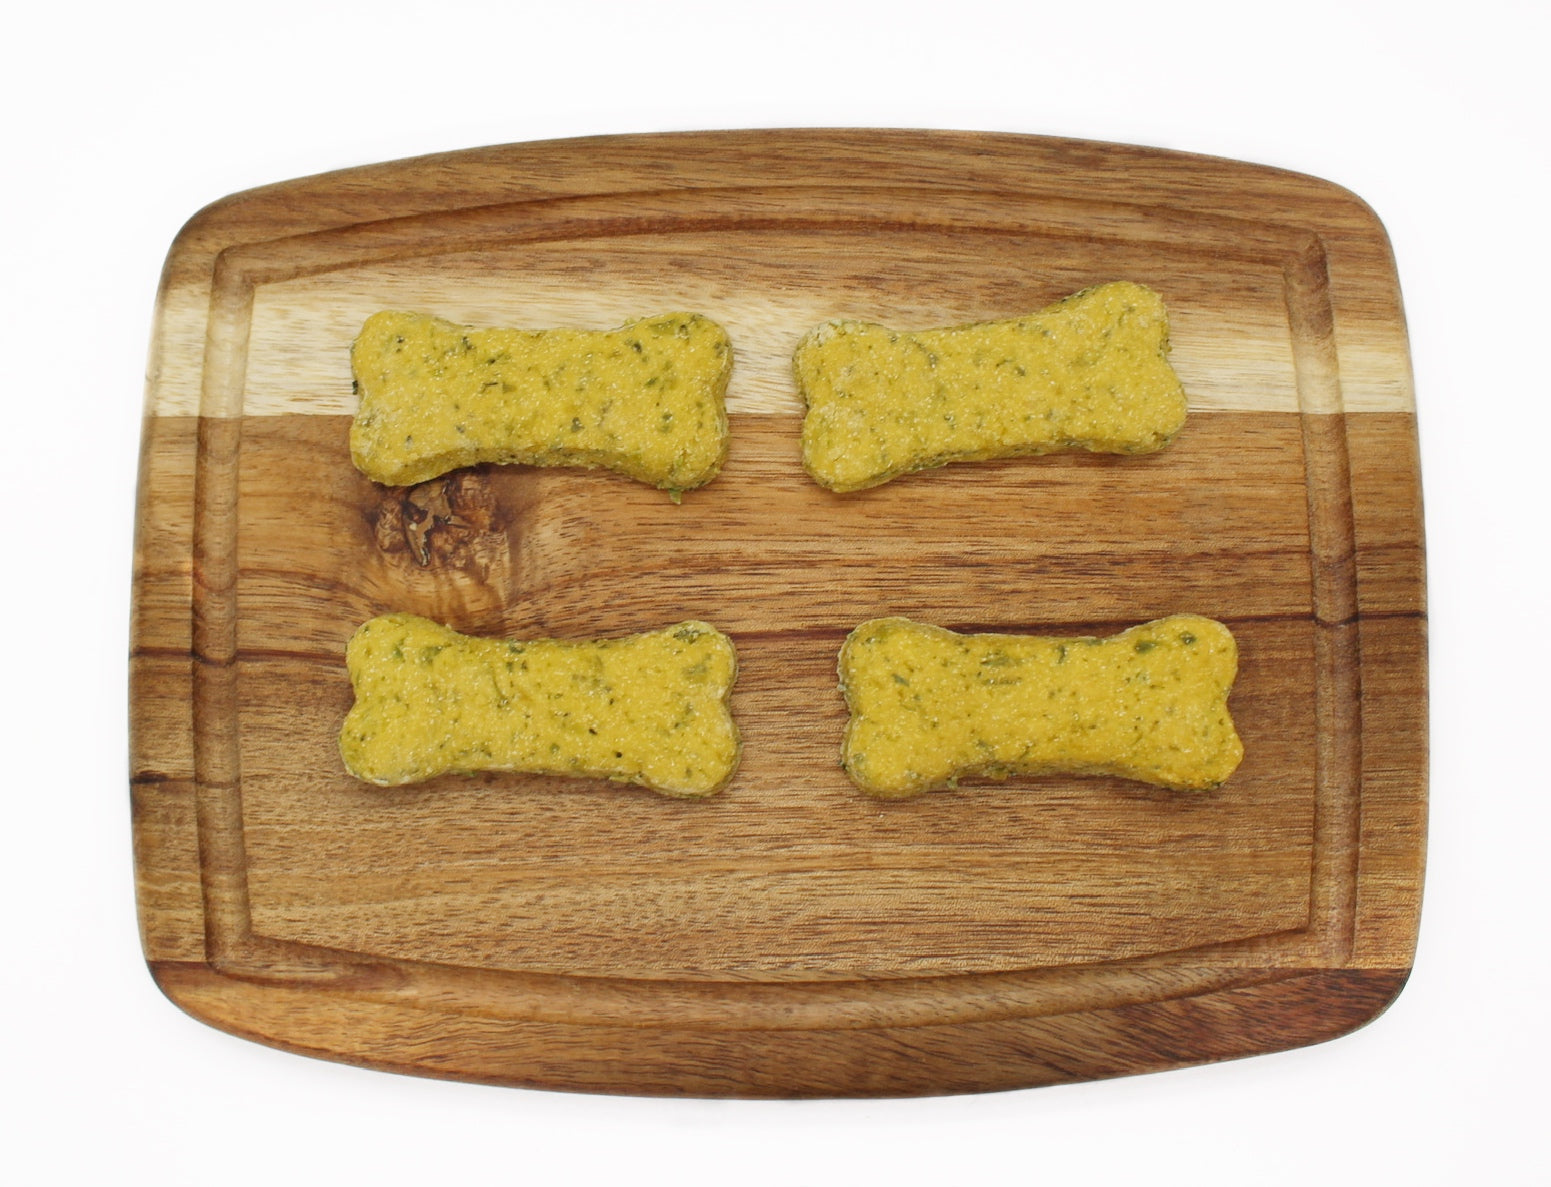 four green bone shaped dog treats on a cutting board in two rows.